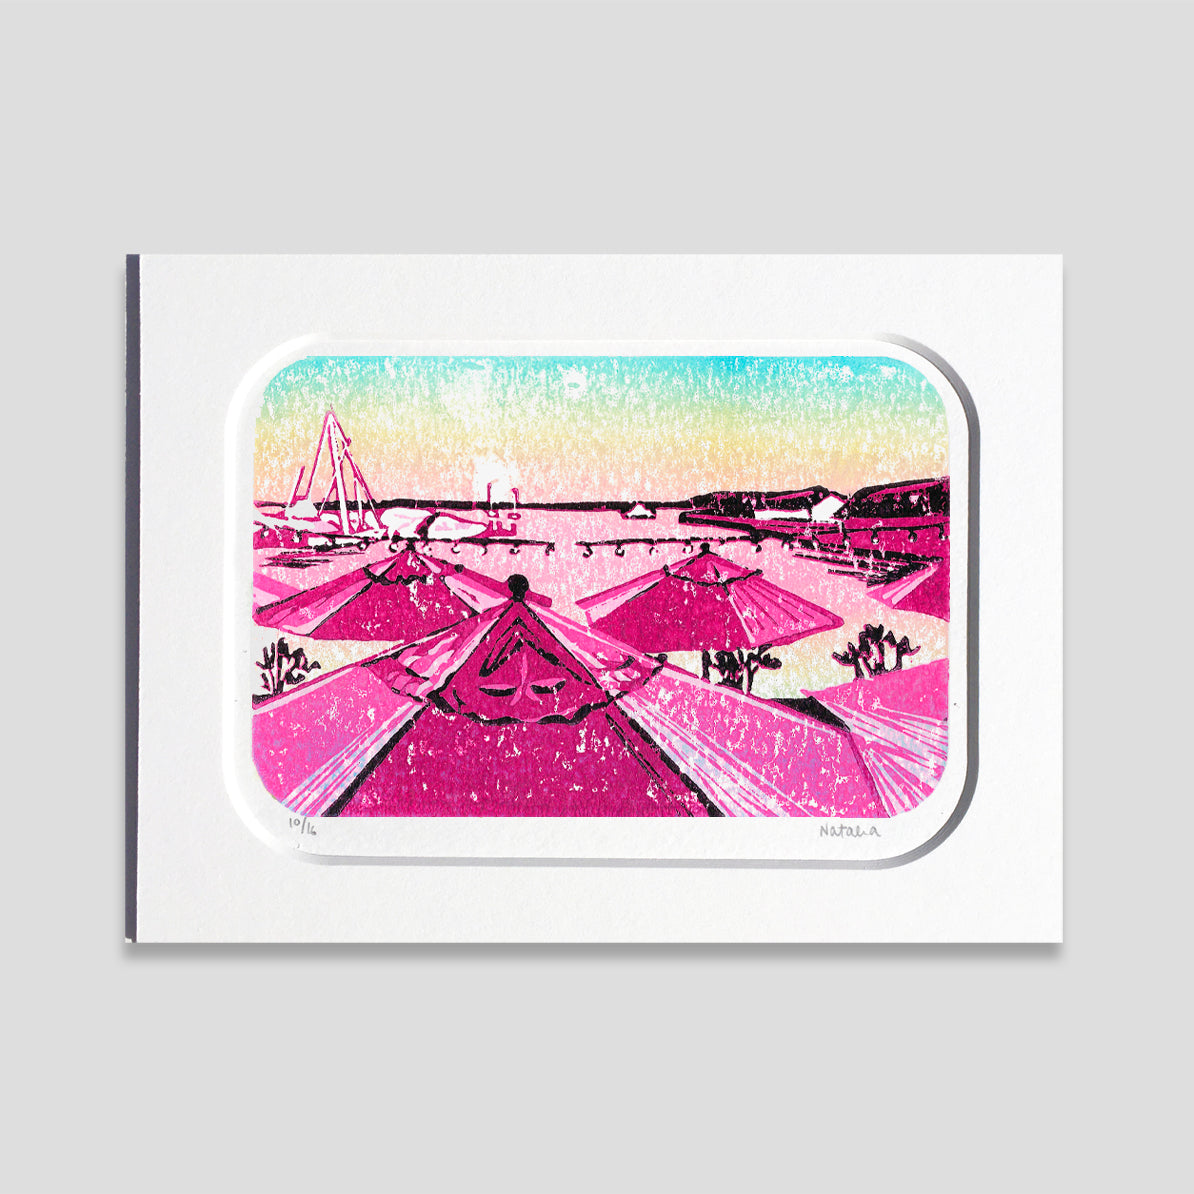 Sunset at the Pony block print created by Natalia Wohletz of Peninsula Prints. Mackinac Island's iconic Pink Pony restaurant and bar is a favorite of sailors, tourists and locals.   The patio serves up great views of ferry boats, sailboats and yachts in the harbor.  